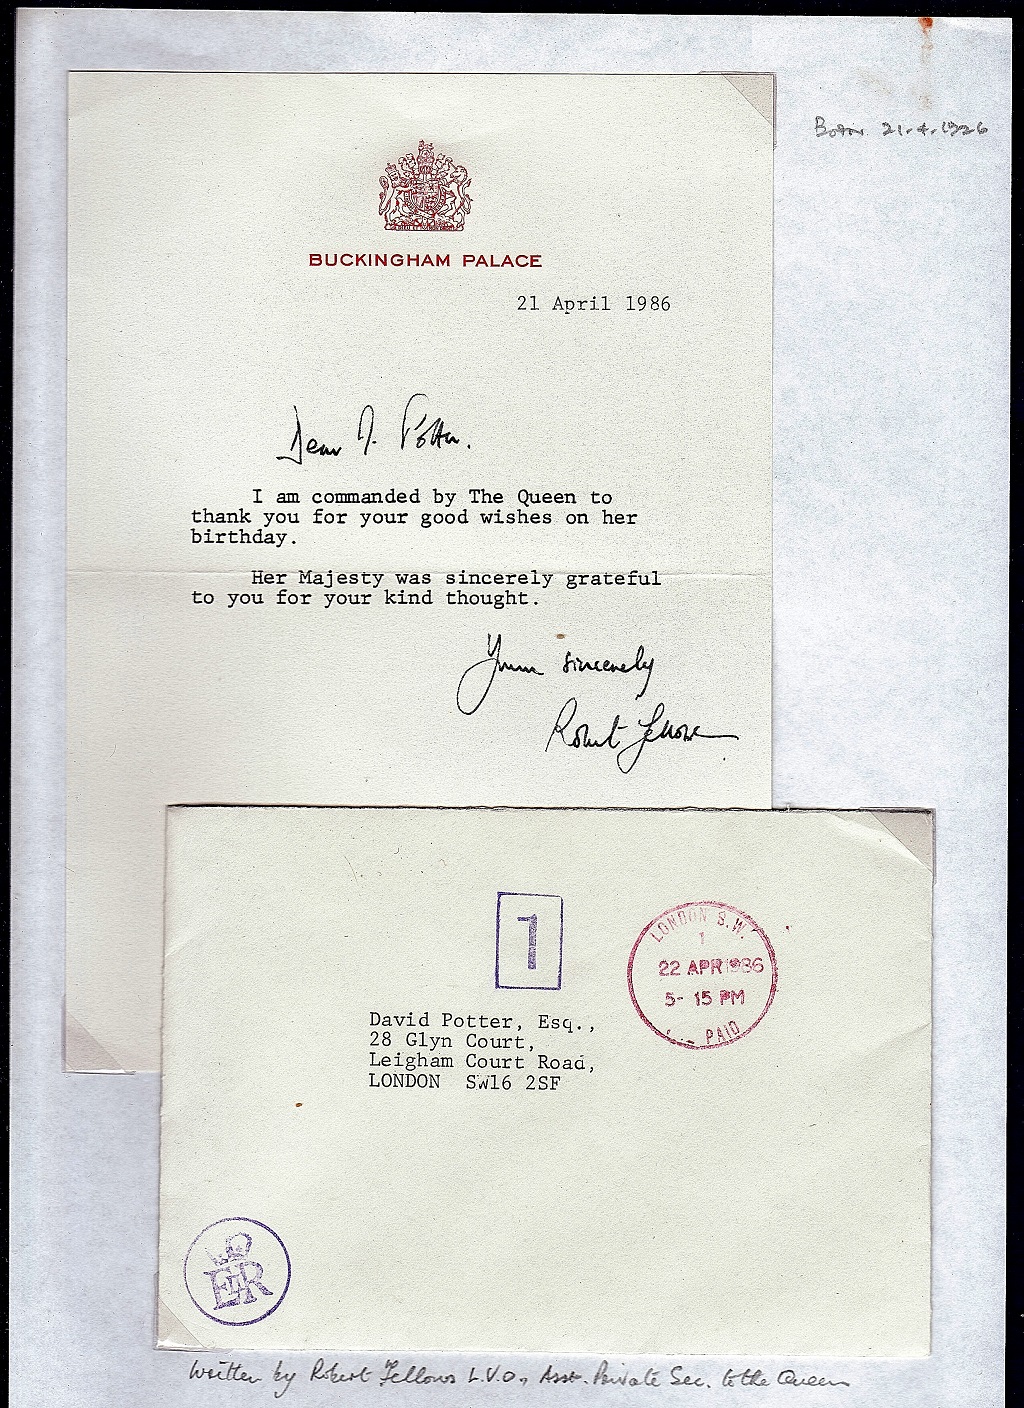 Great Britain - 1986 Buckingham Palace  Letter and Envelope to London address. - Image 3 of 3